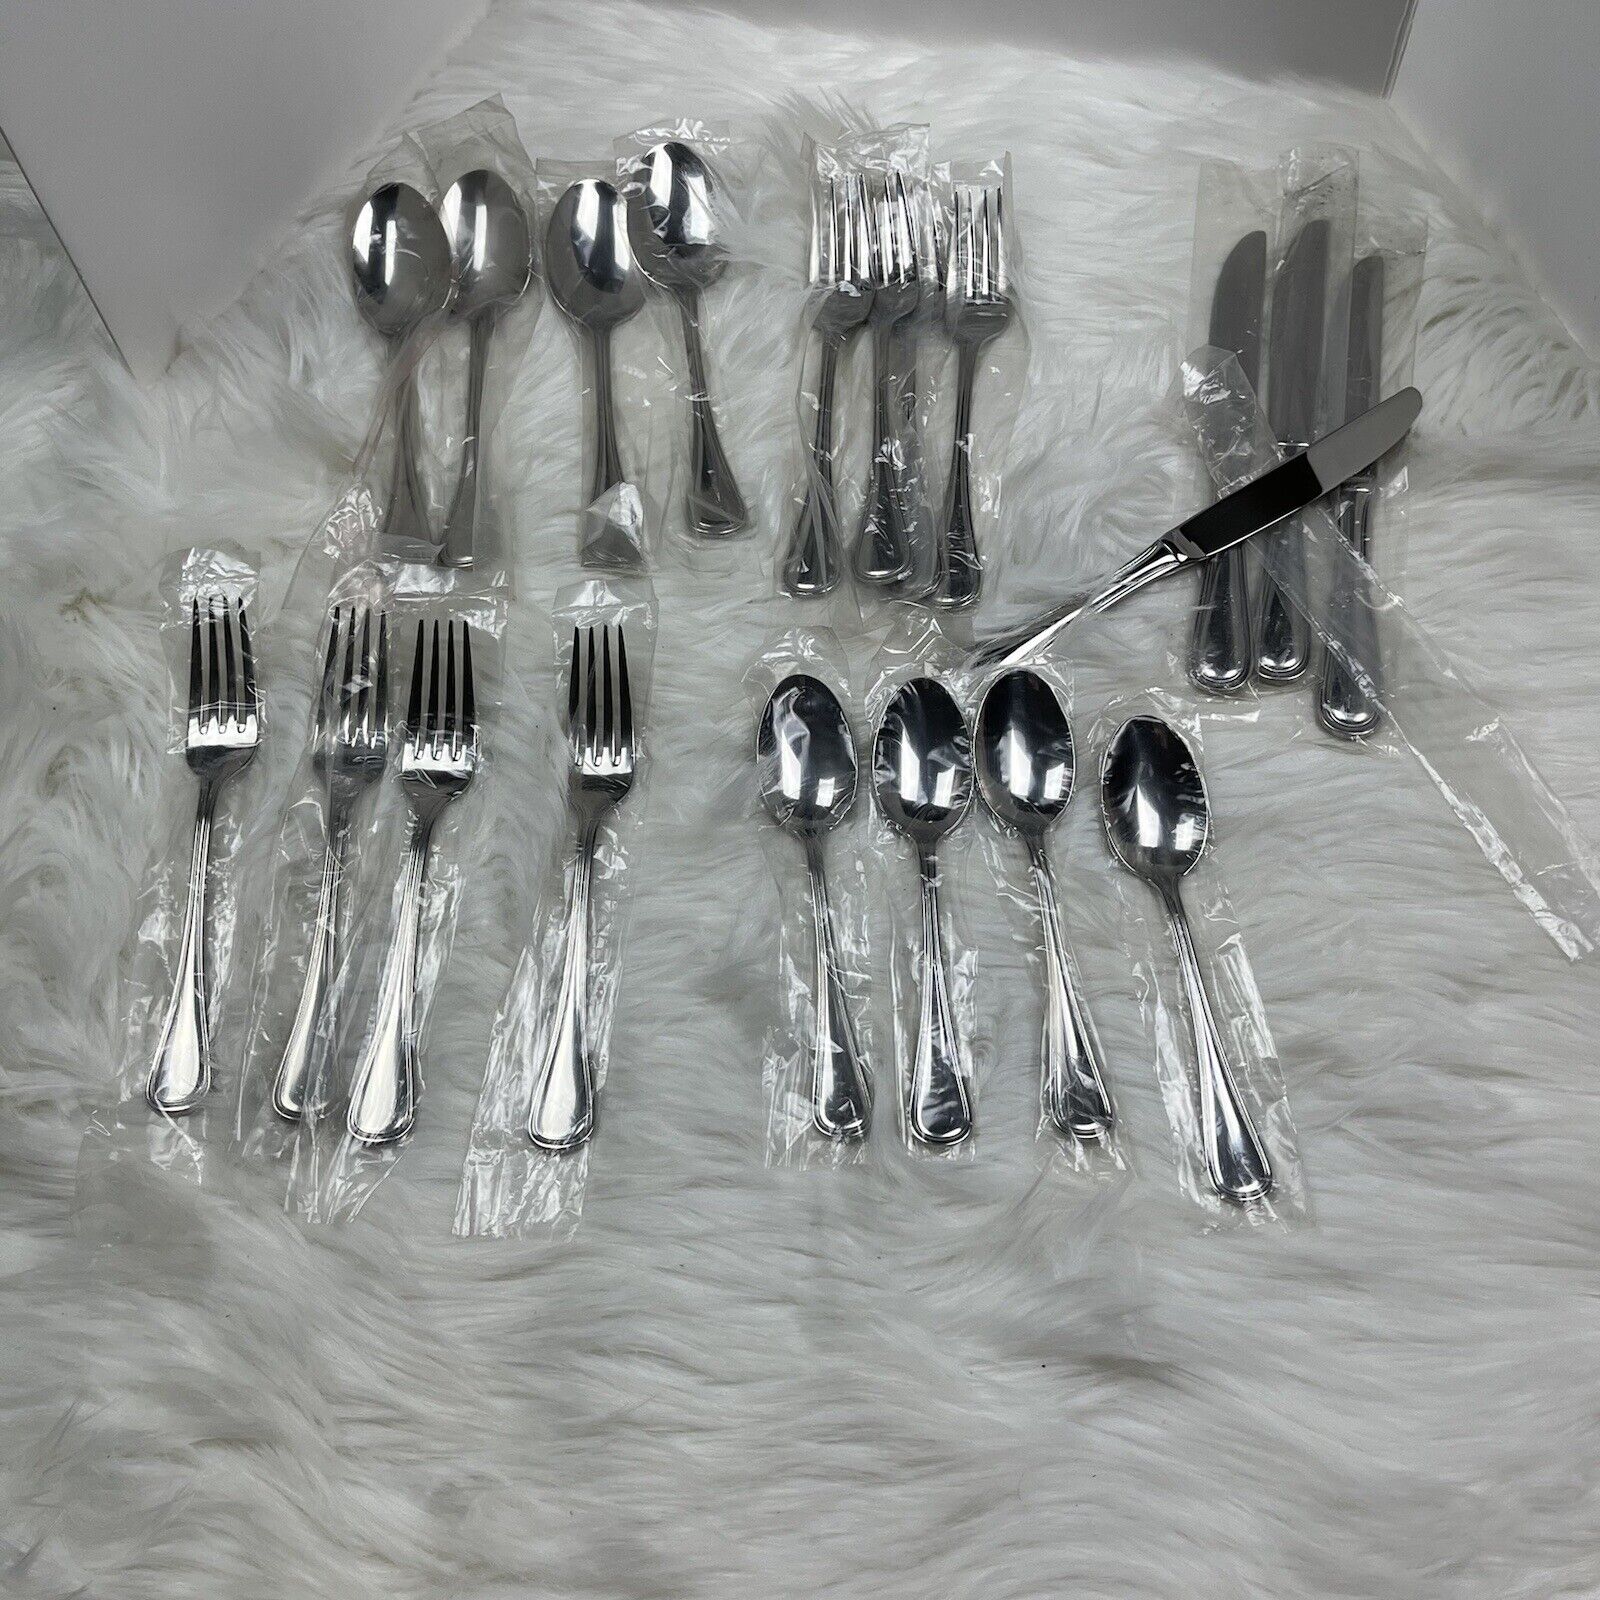 WALLACE Stainless 18/8 20 Piece Service for 4 Unused Flatware Silverware